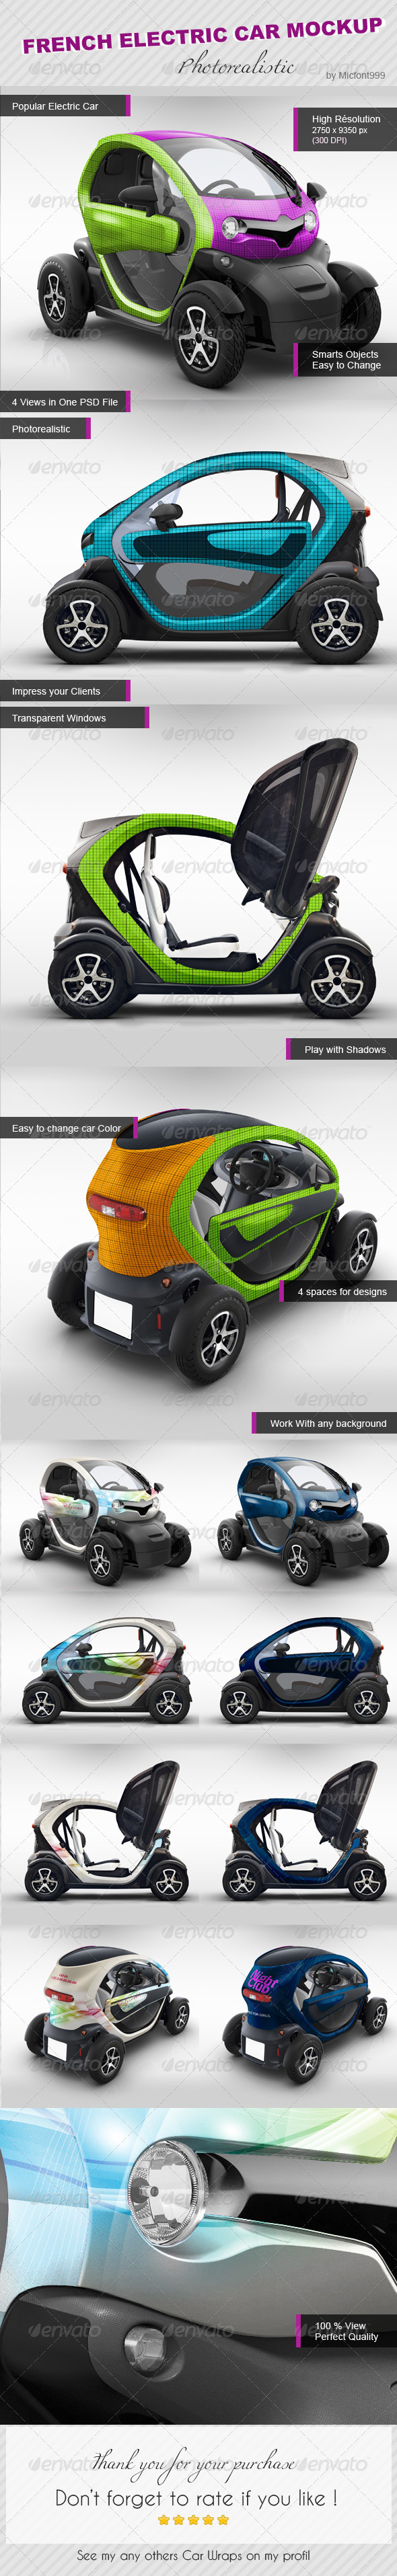 Photorealistic French Popular Electric Car MockUp